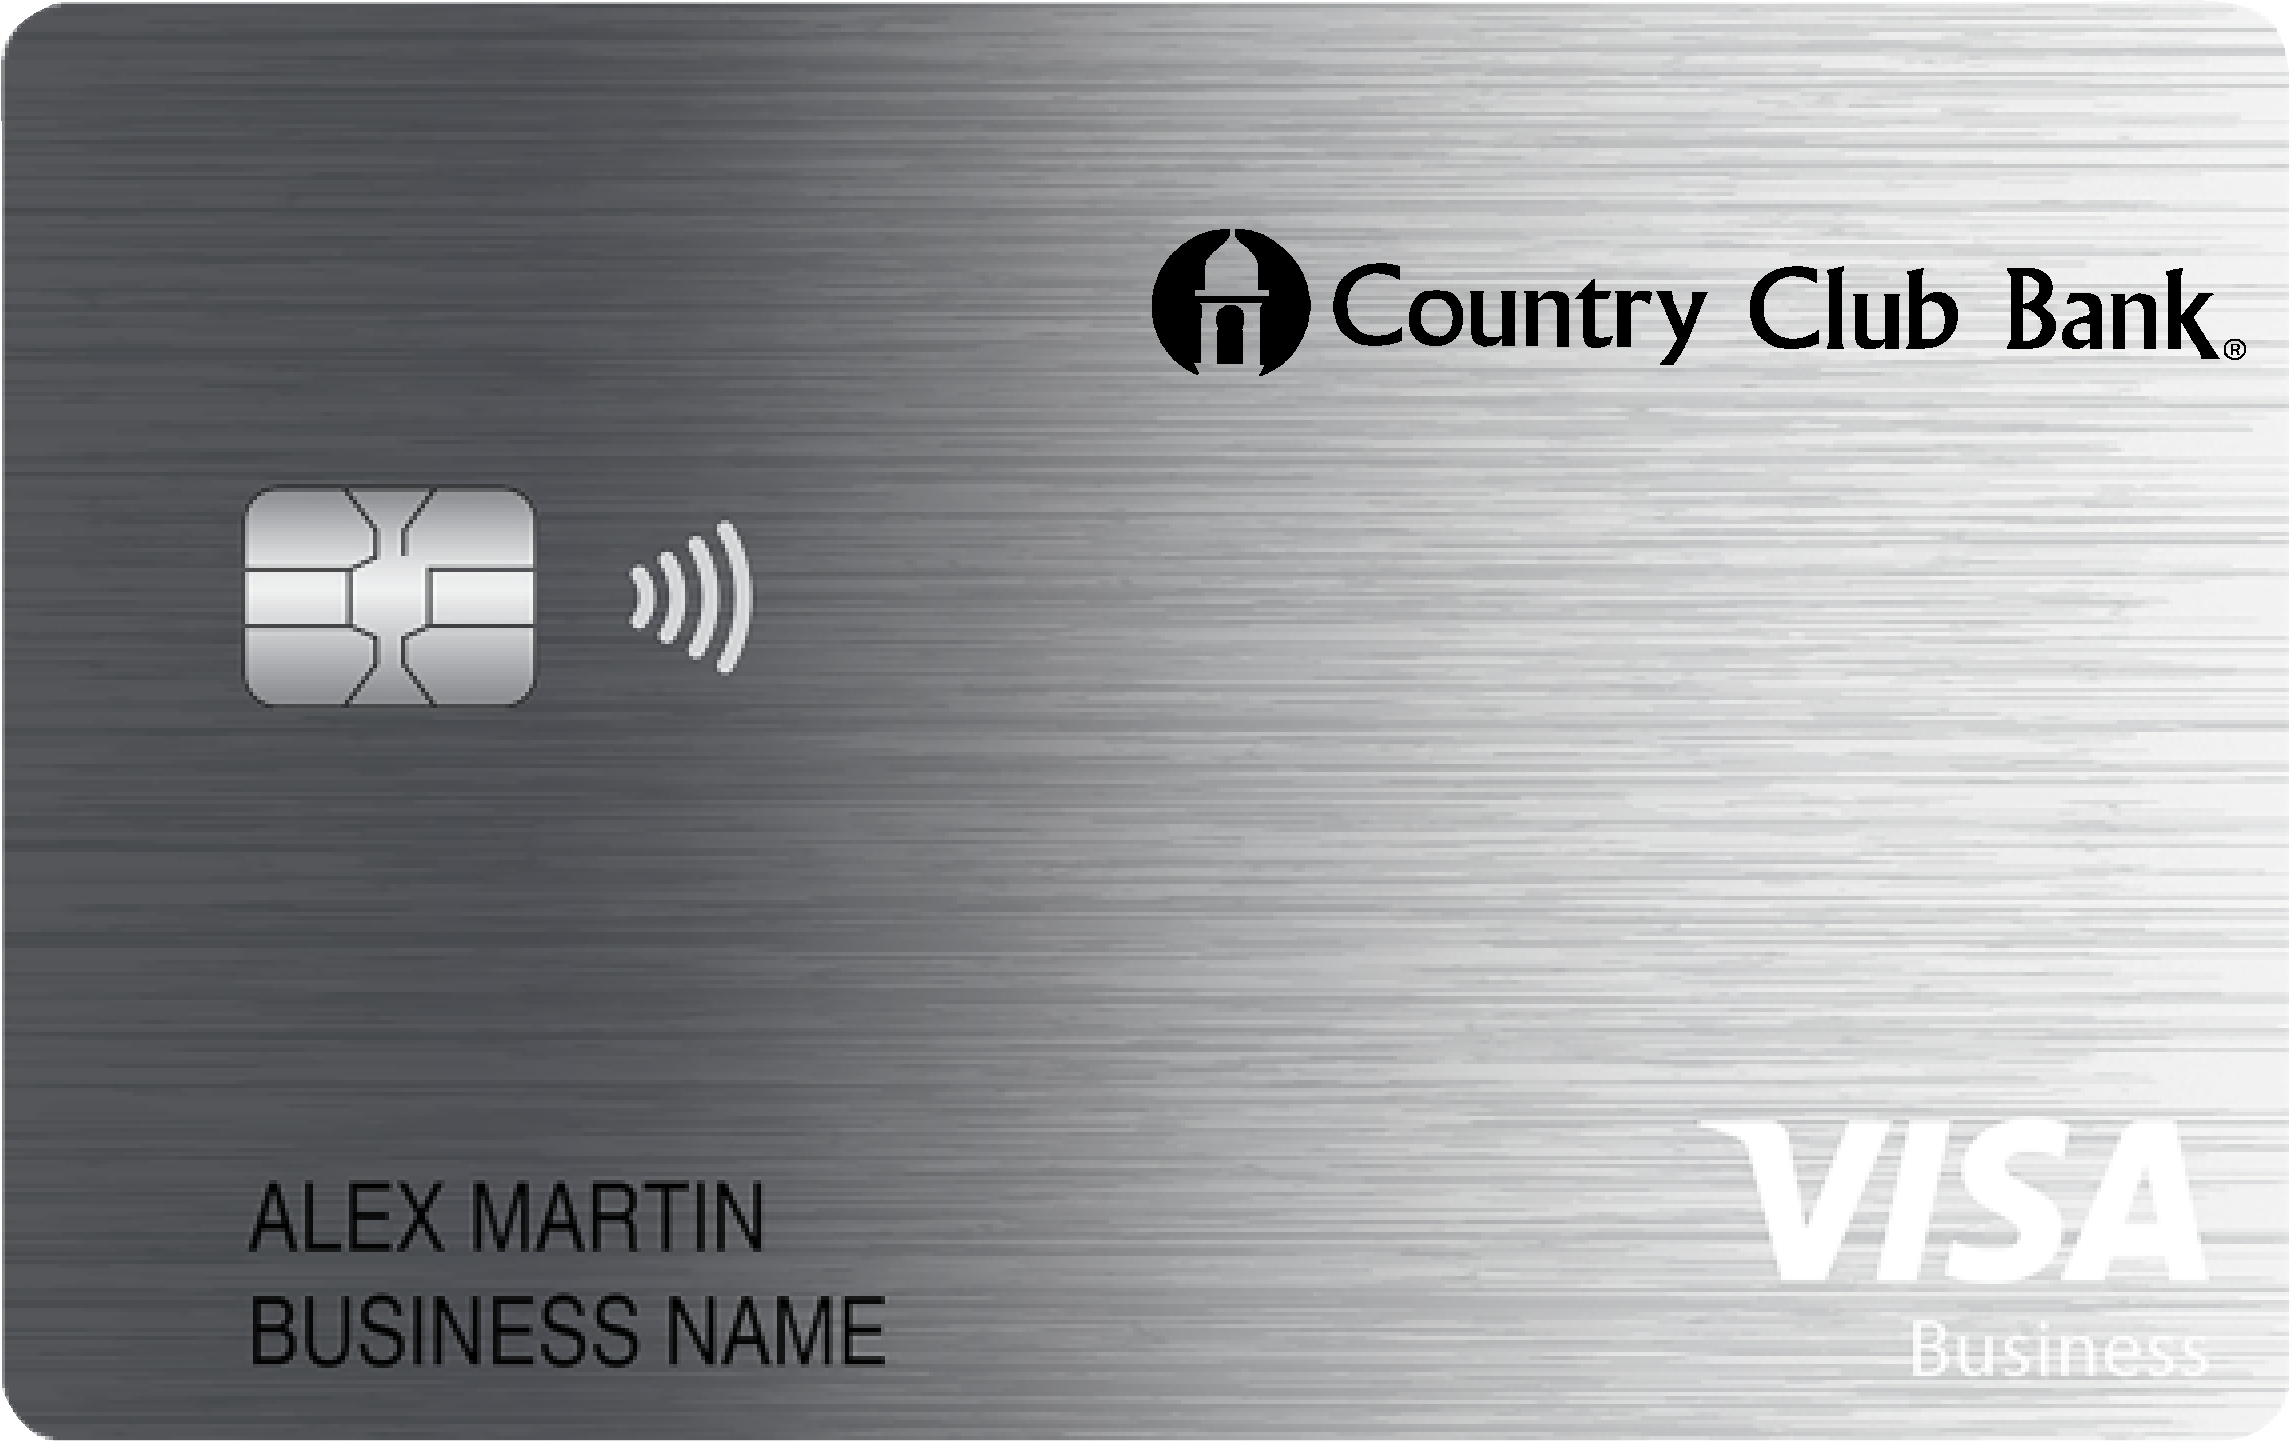 Country Club Bank Business Cash Preferred Card